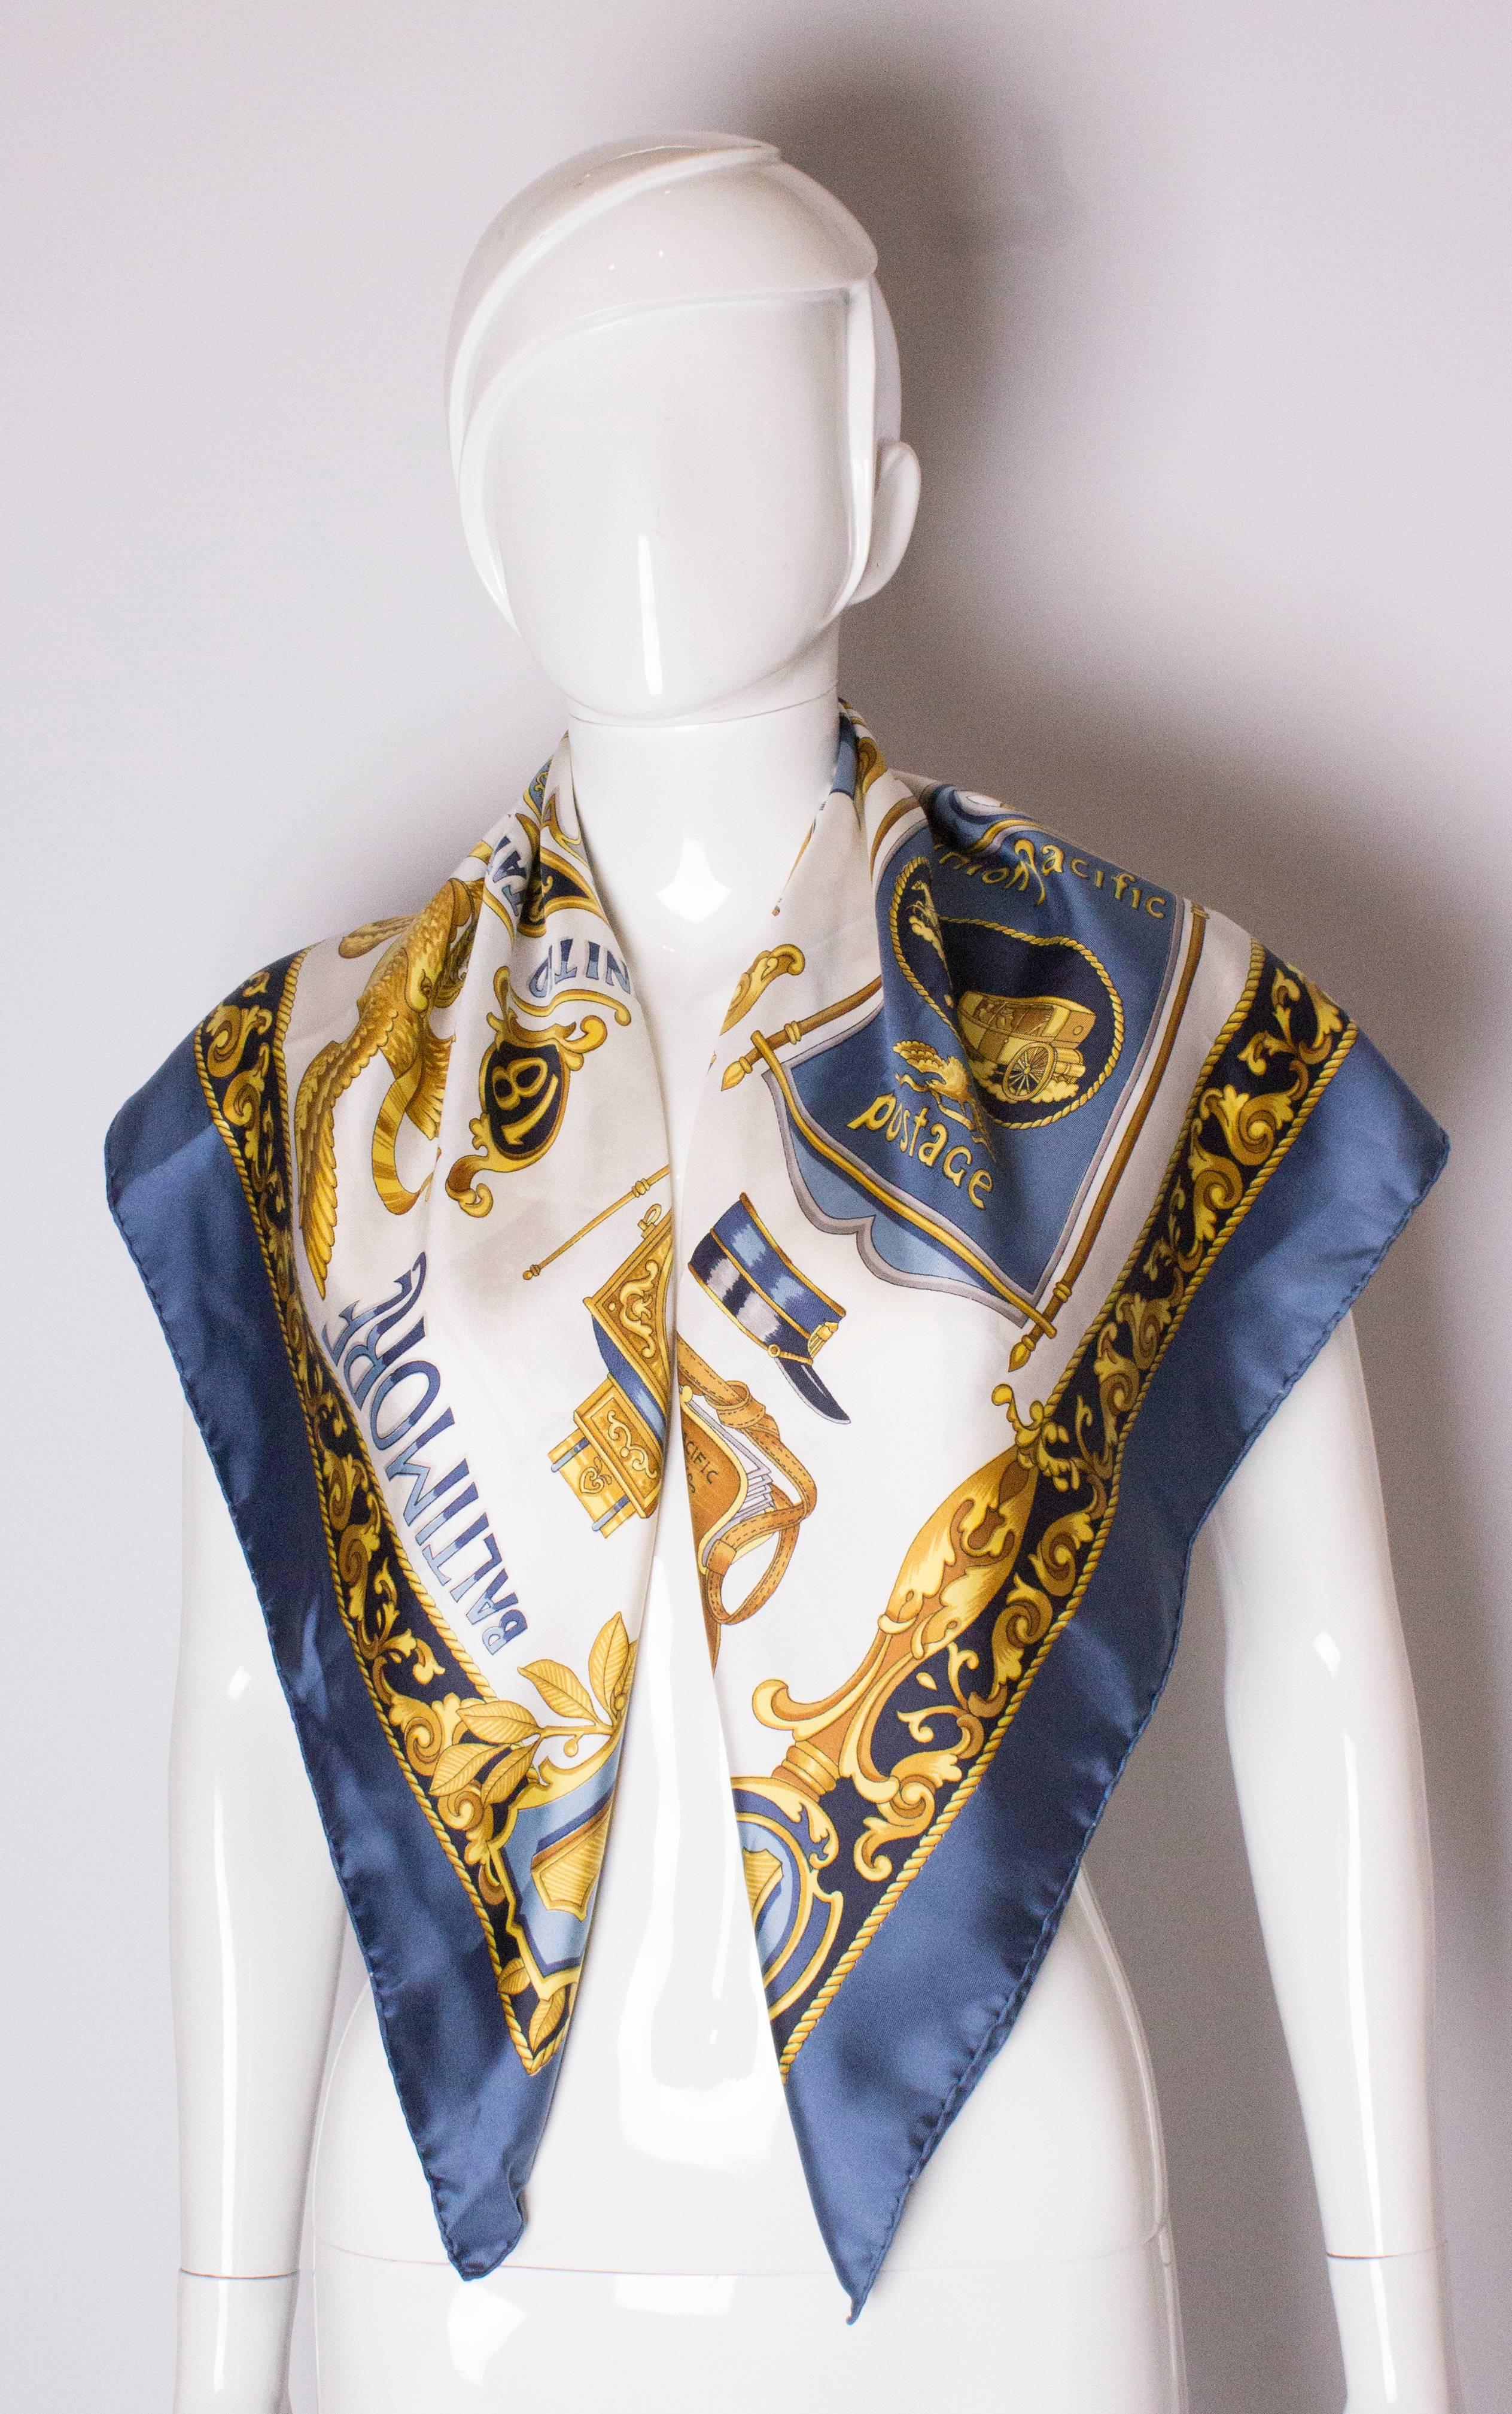 A super silk scarf by Celine. This scarf has a petrol blue border , and is titled the Baltimore and Ohio railway. The scarf measured 36'' square.